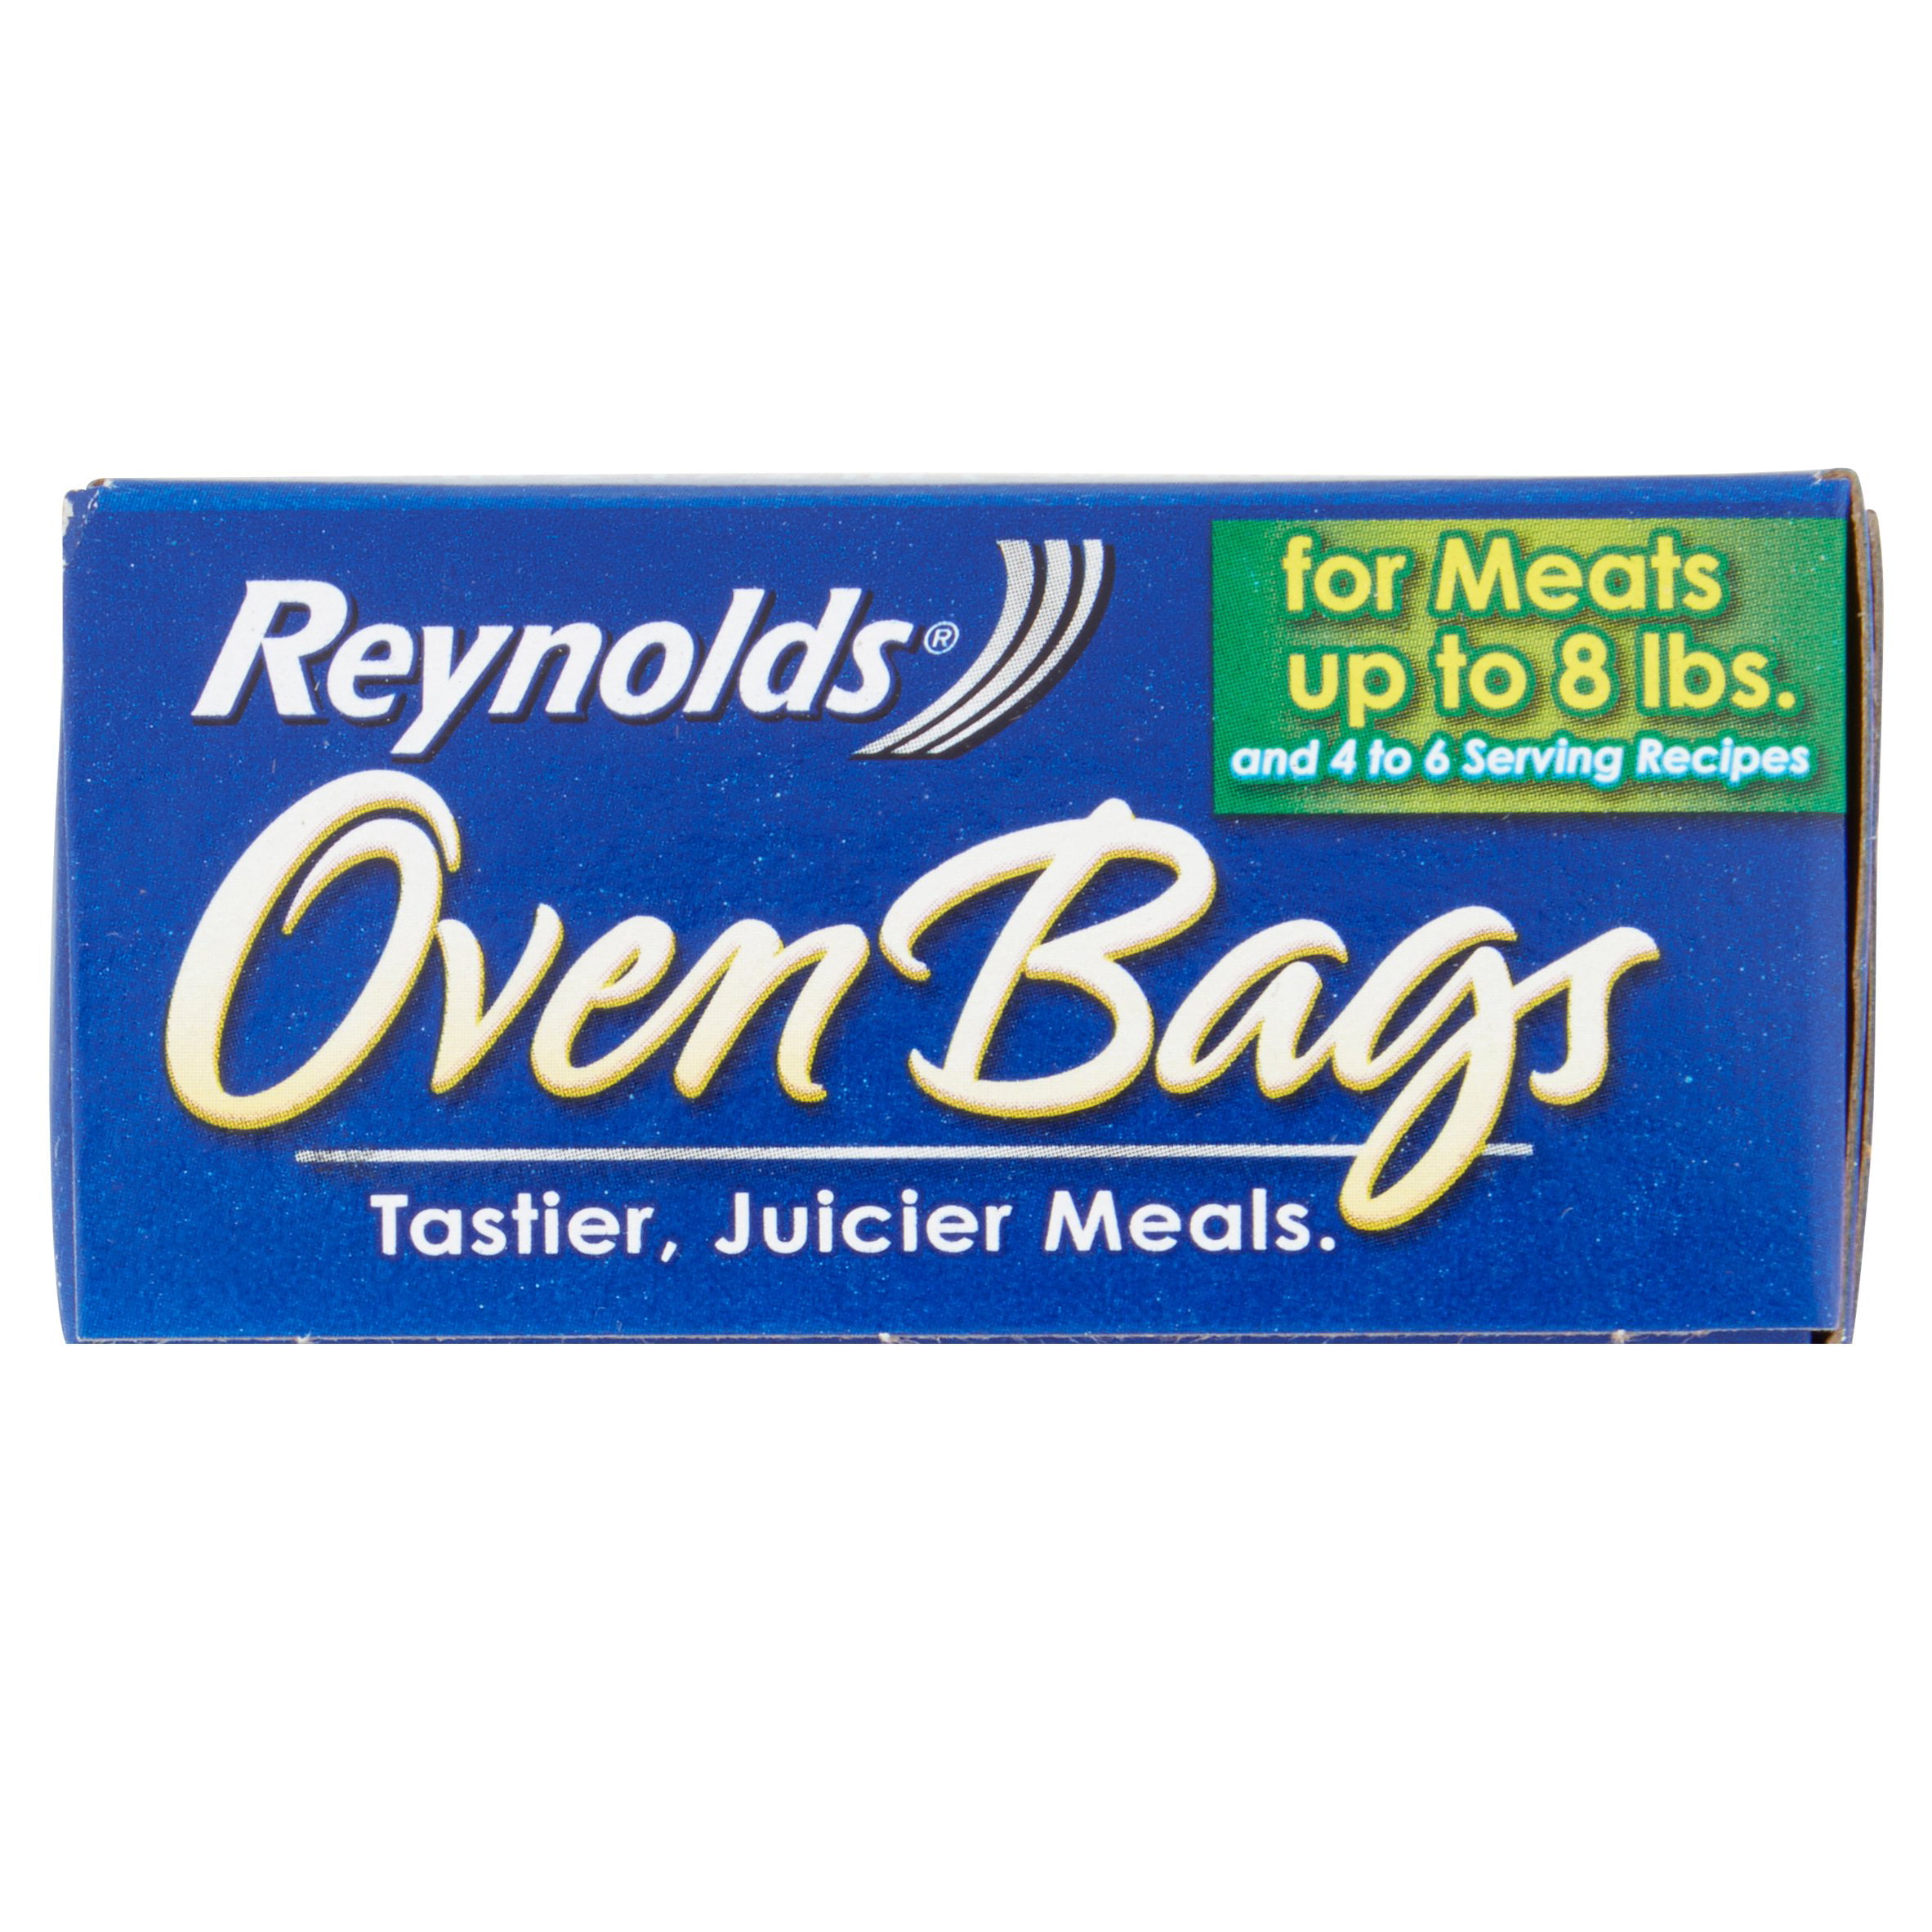 Reynolds Kitchens Large Oven Bags, 5 Count (Pack of 12)